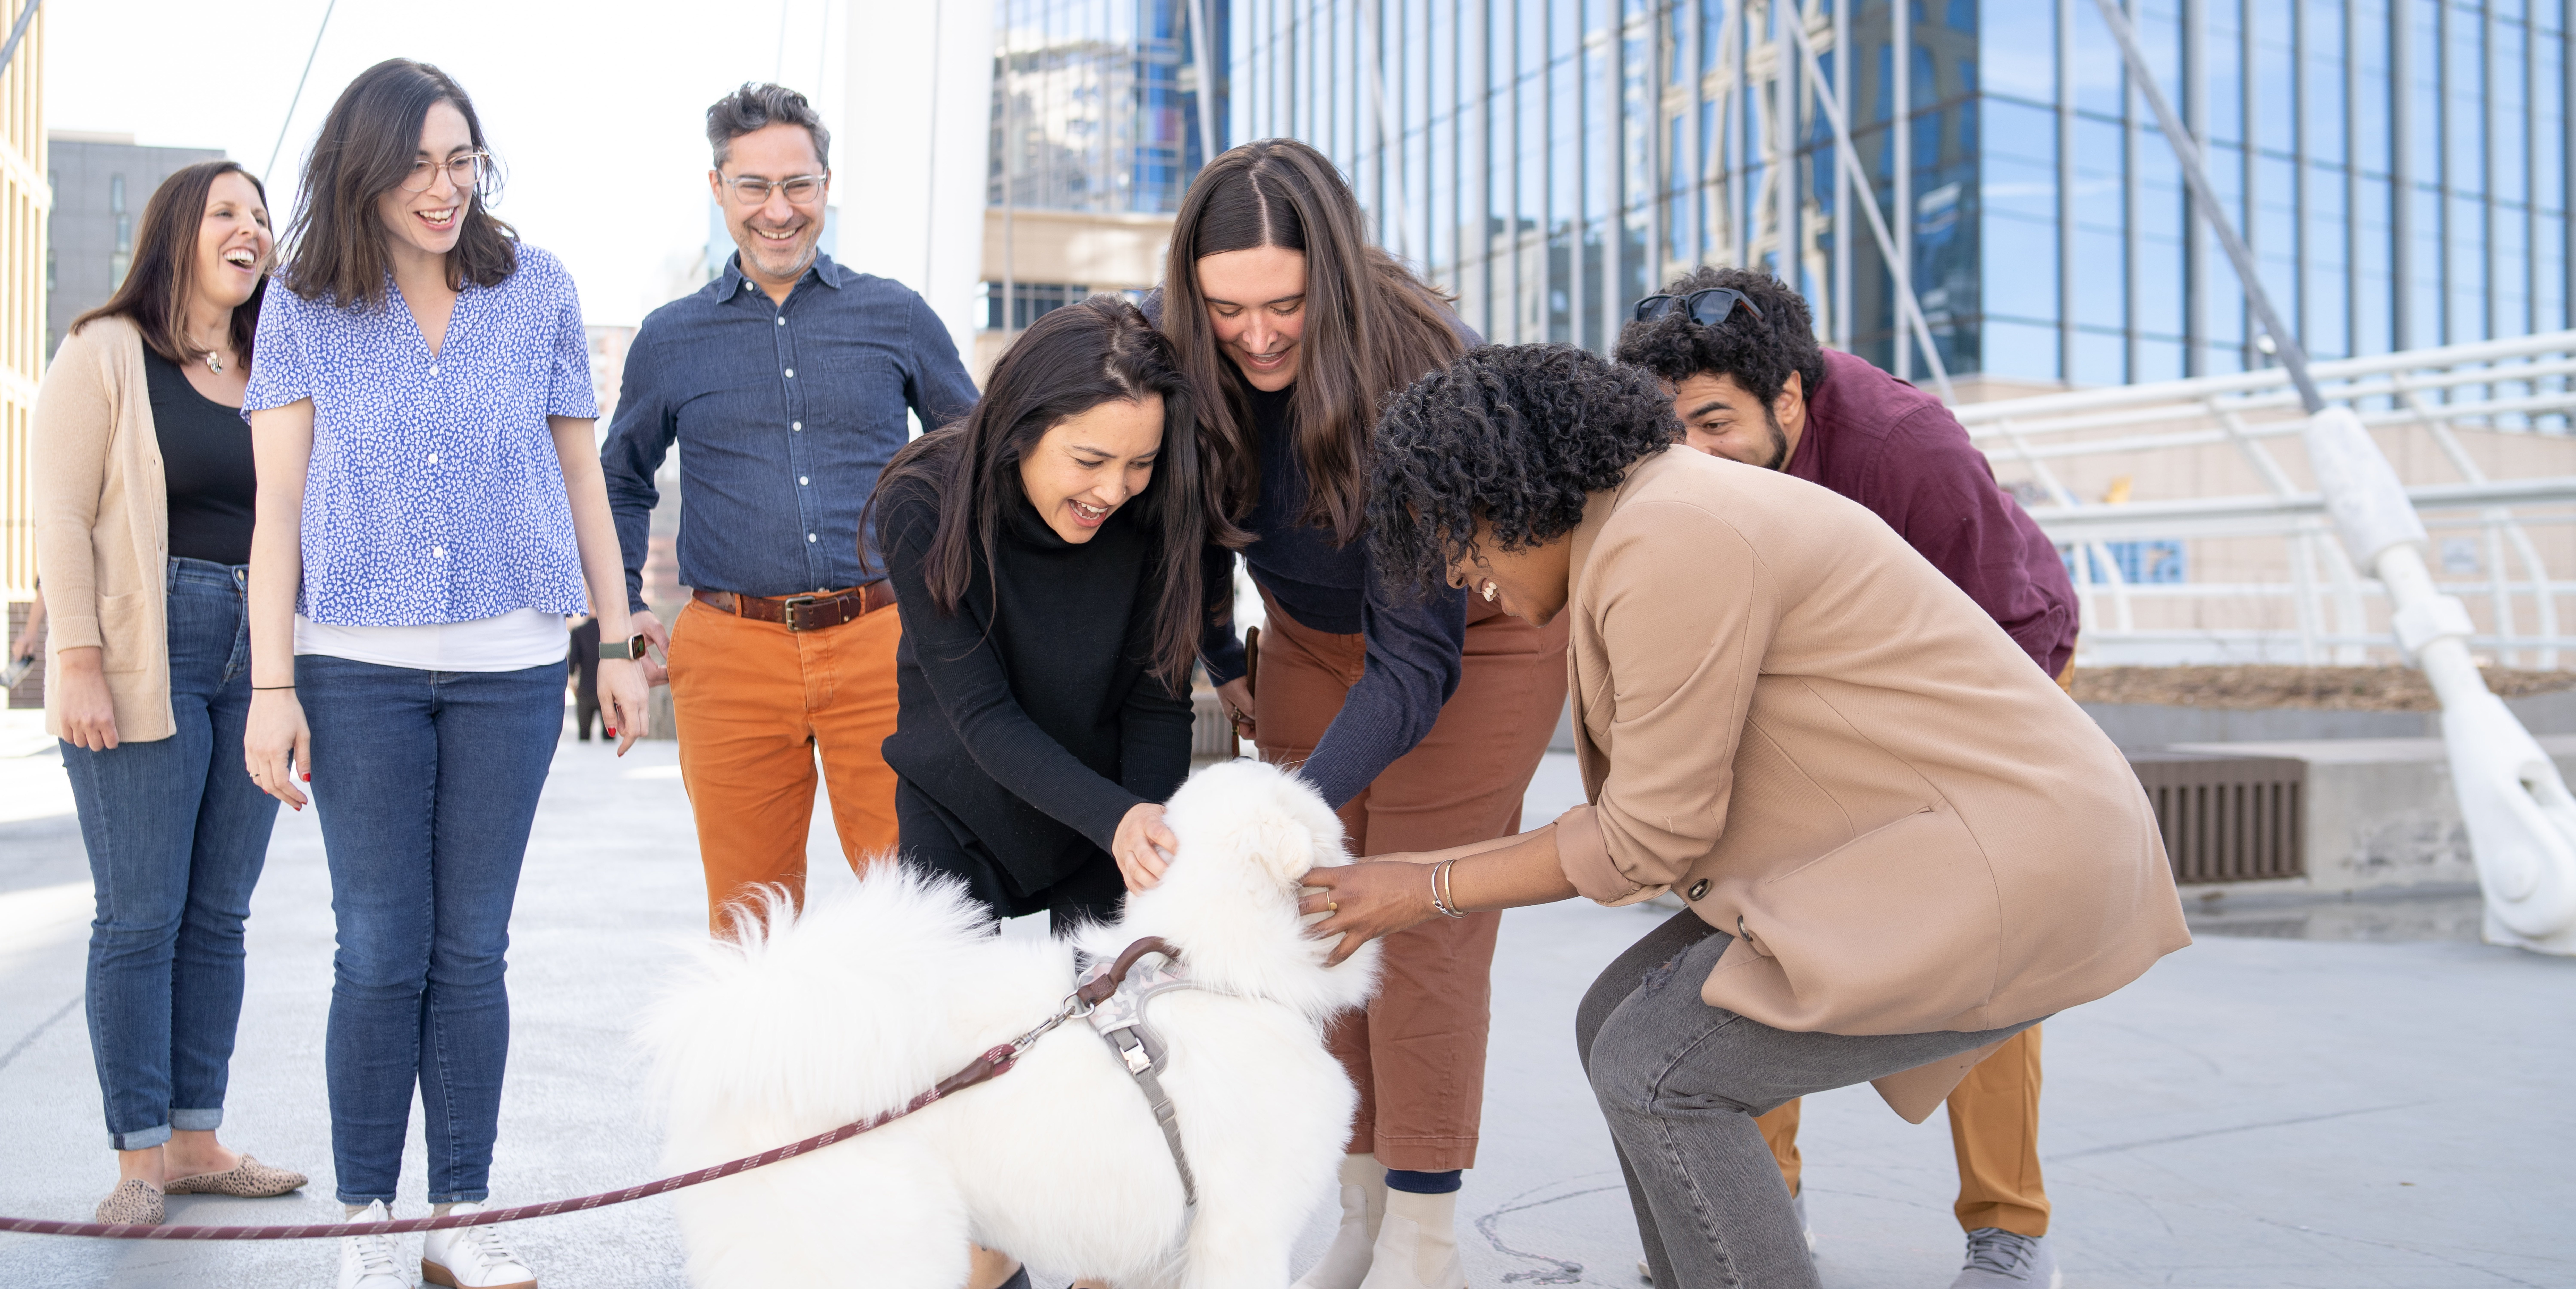 The August team gathers around a friendly dog in a city plaza, giving scritches and smiles.